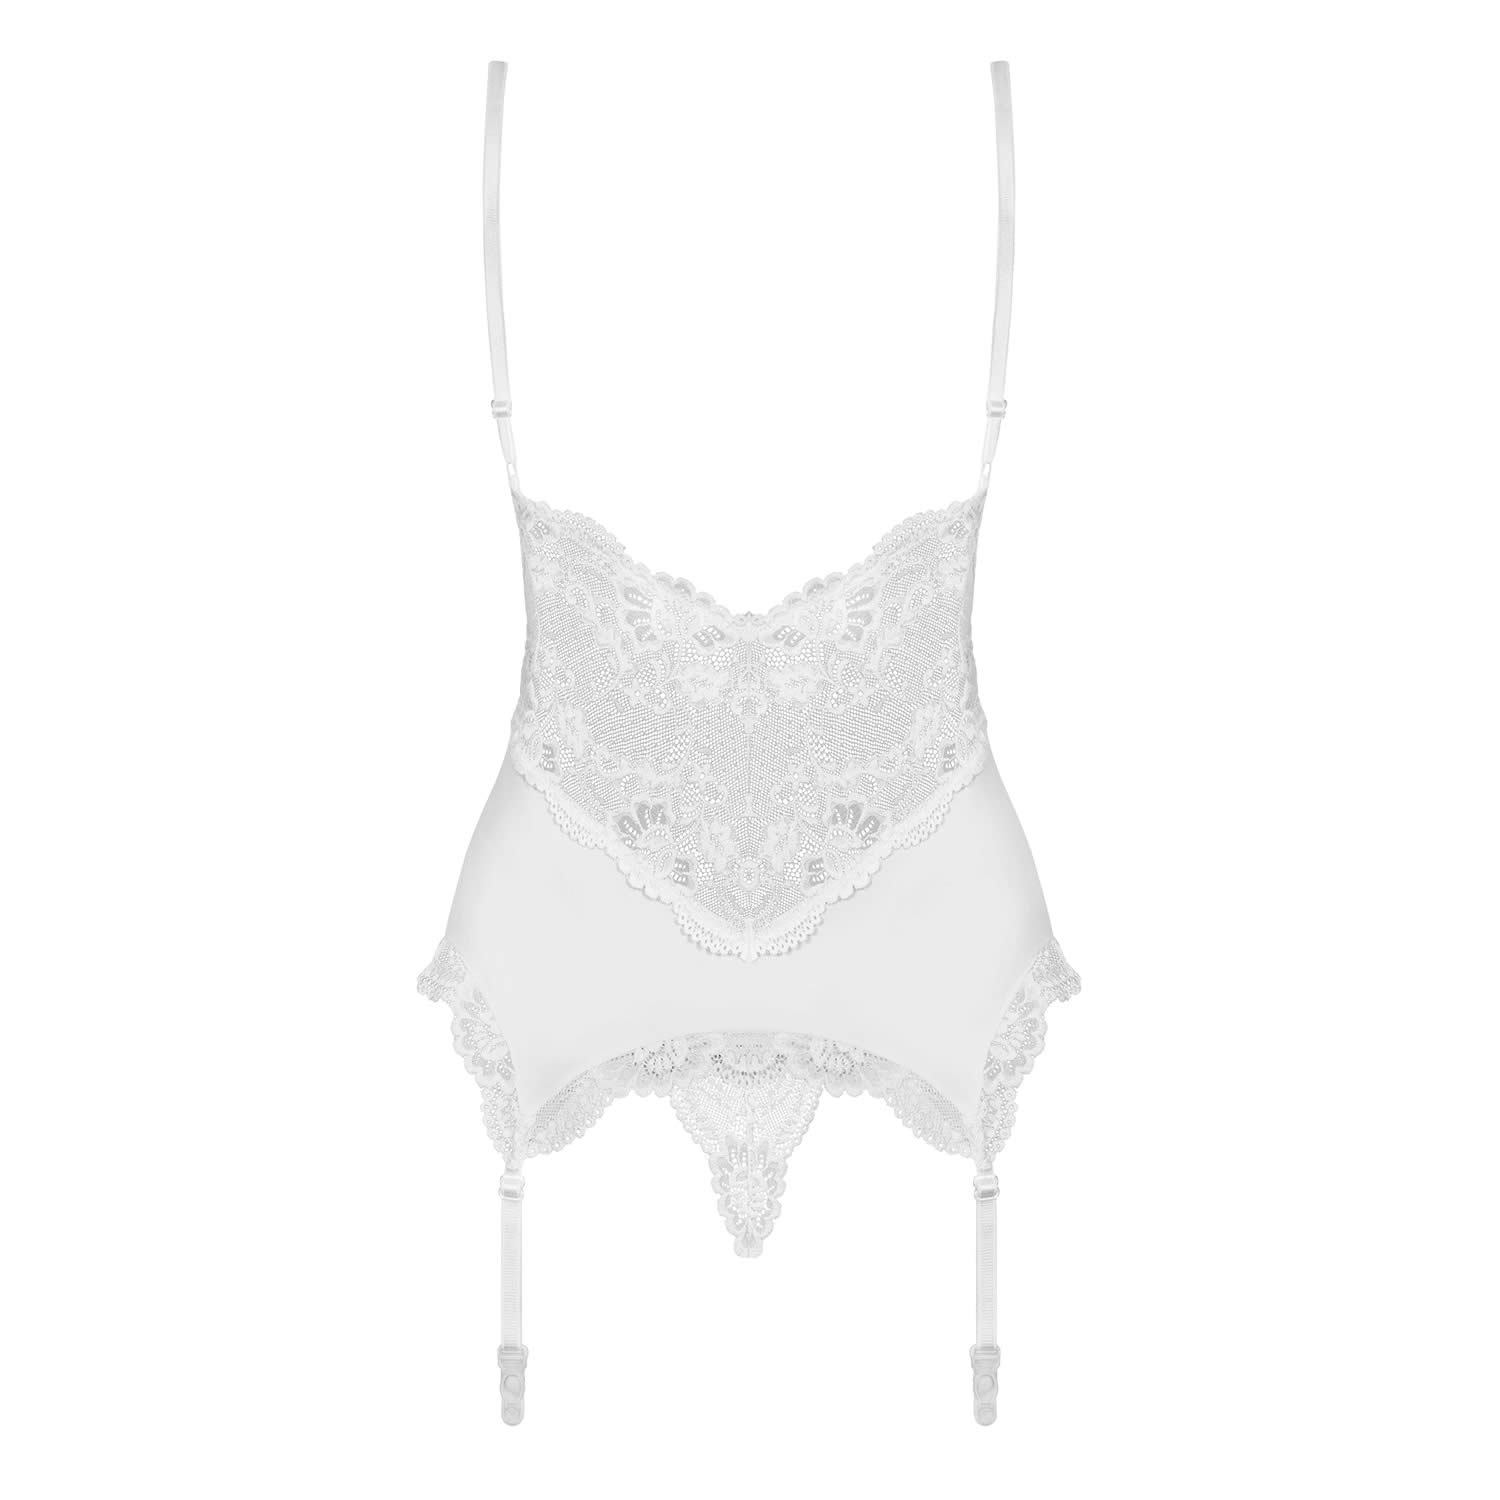 Obsessive Mia Lace Basque with Suspenders